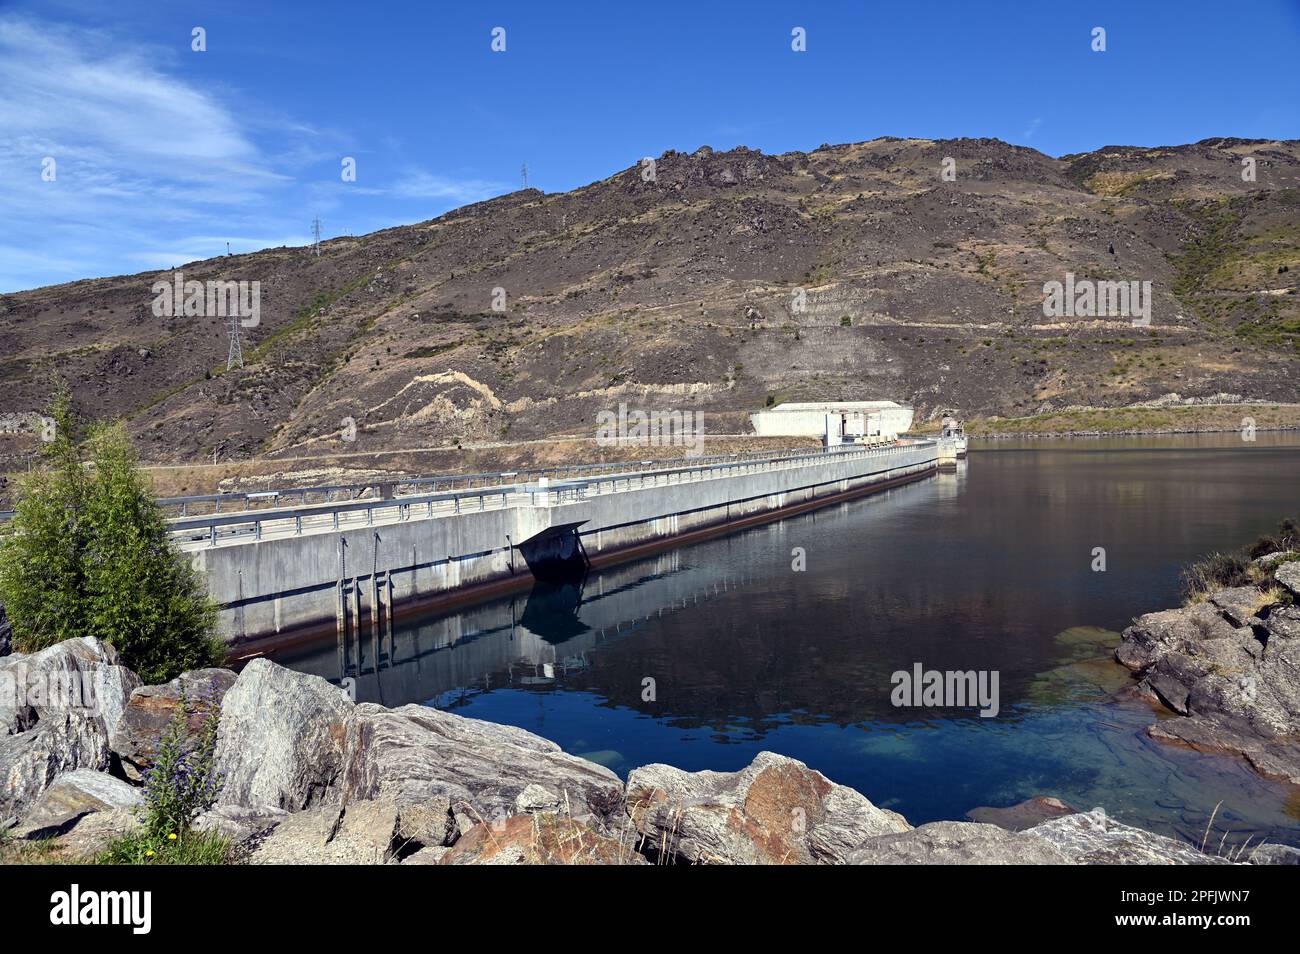 Clyde Dam on the Clutha River, in Central Otago, South Island, New Zealand. It is the largest concrete gravity dam in New Zealand. Stock Photo